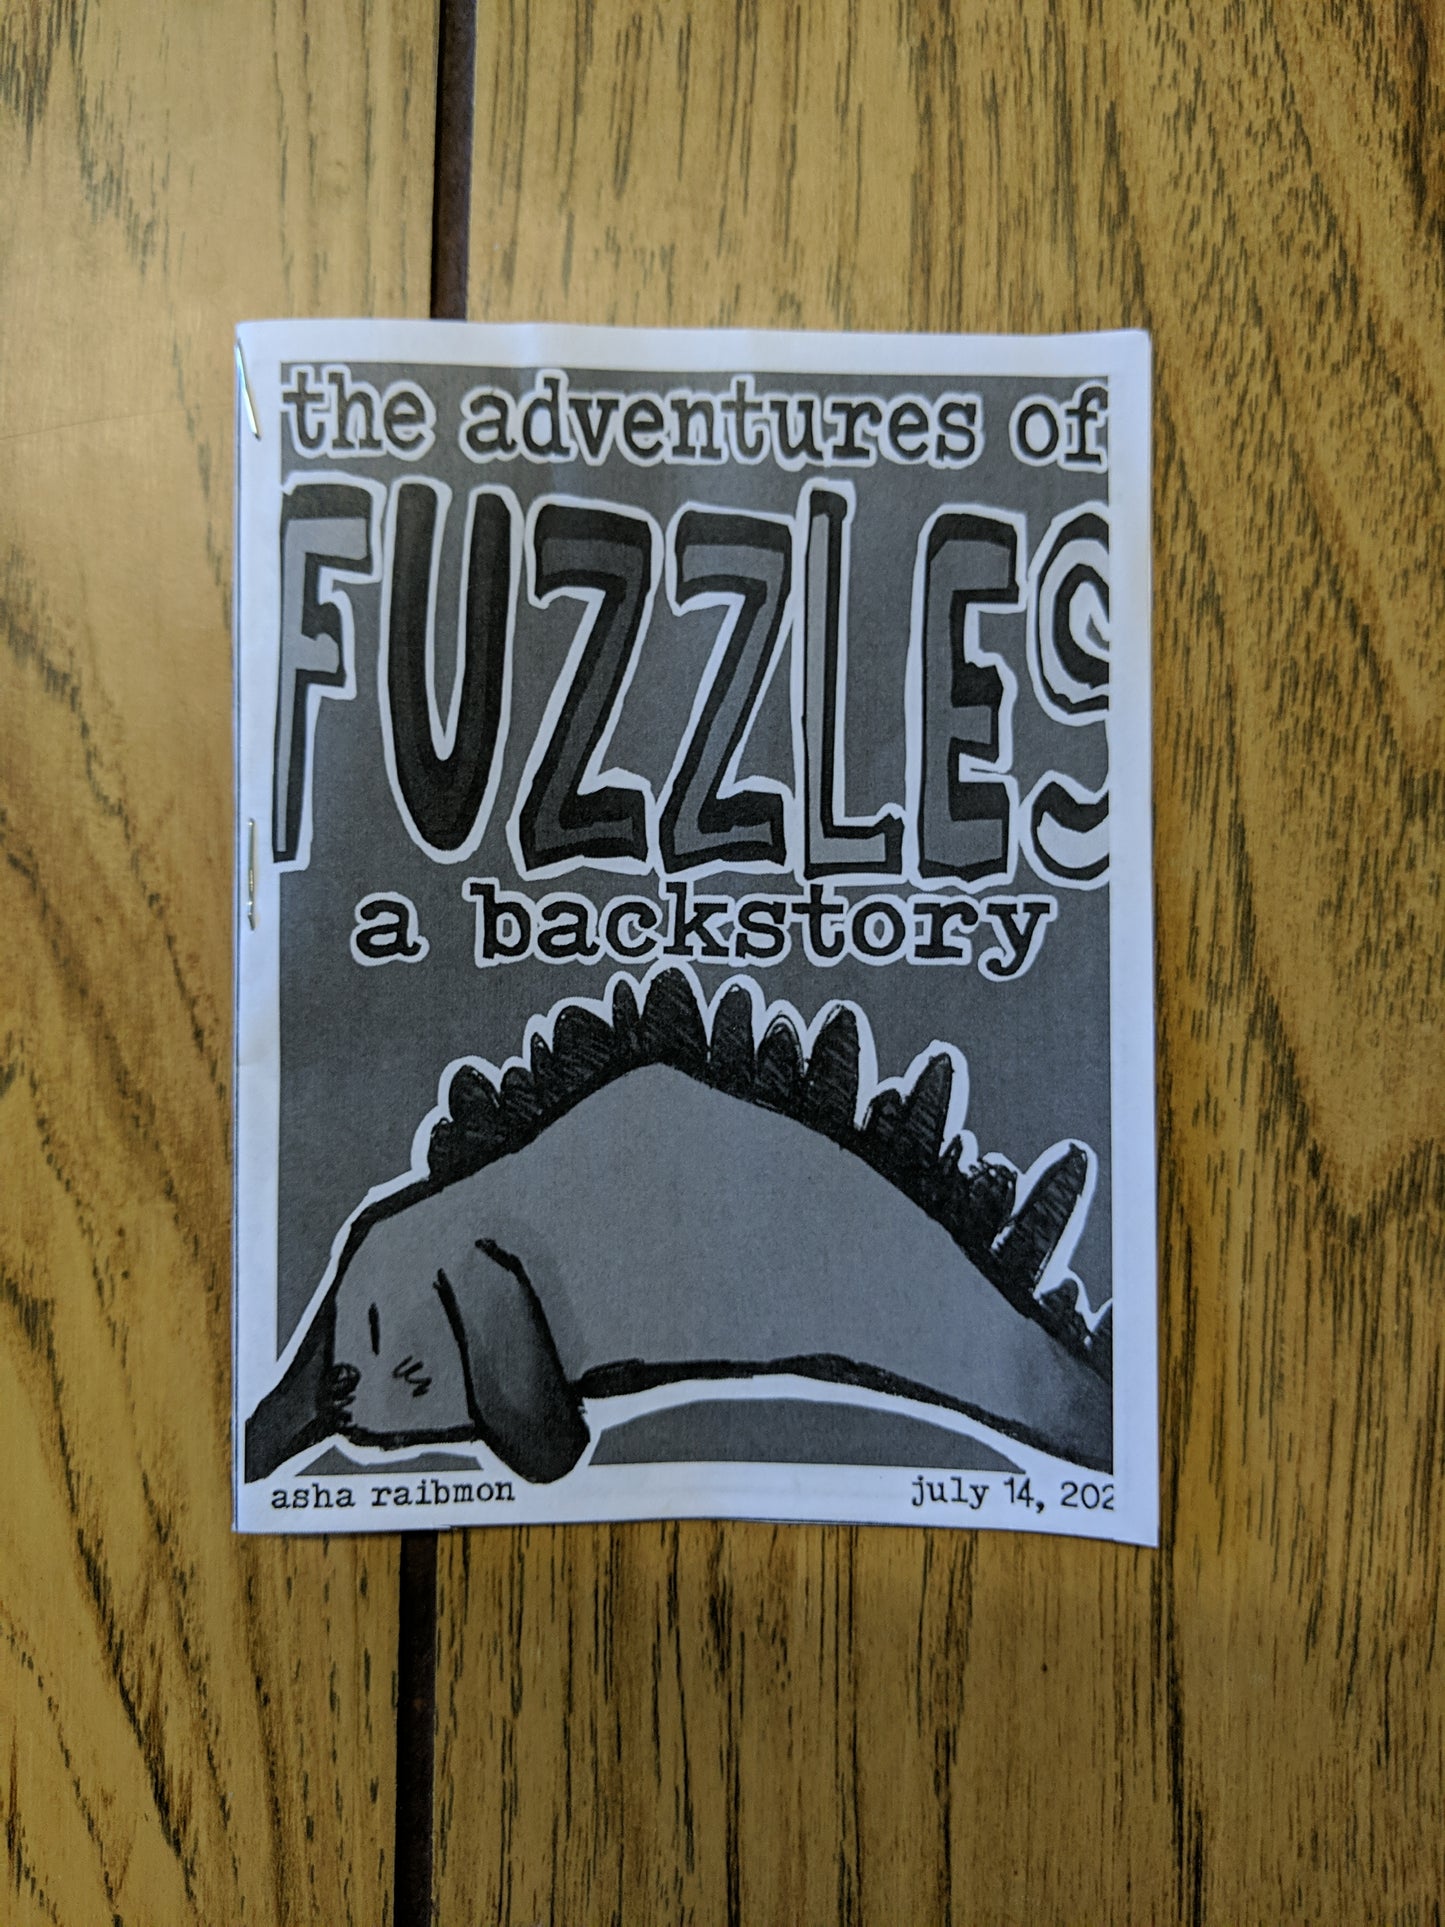 The Adventures of Fuzzles: A Backstory